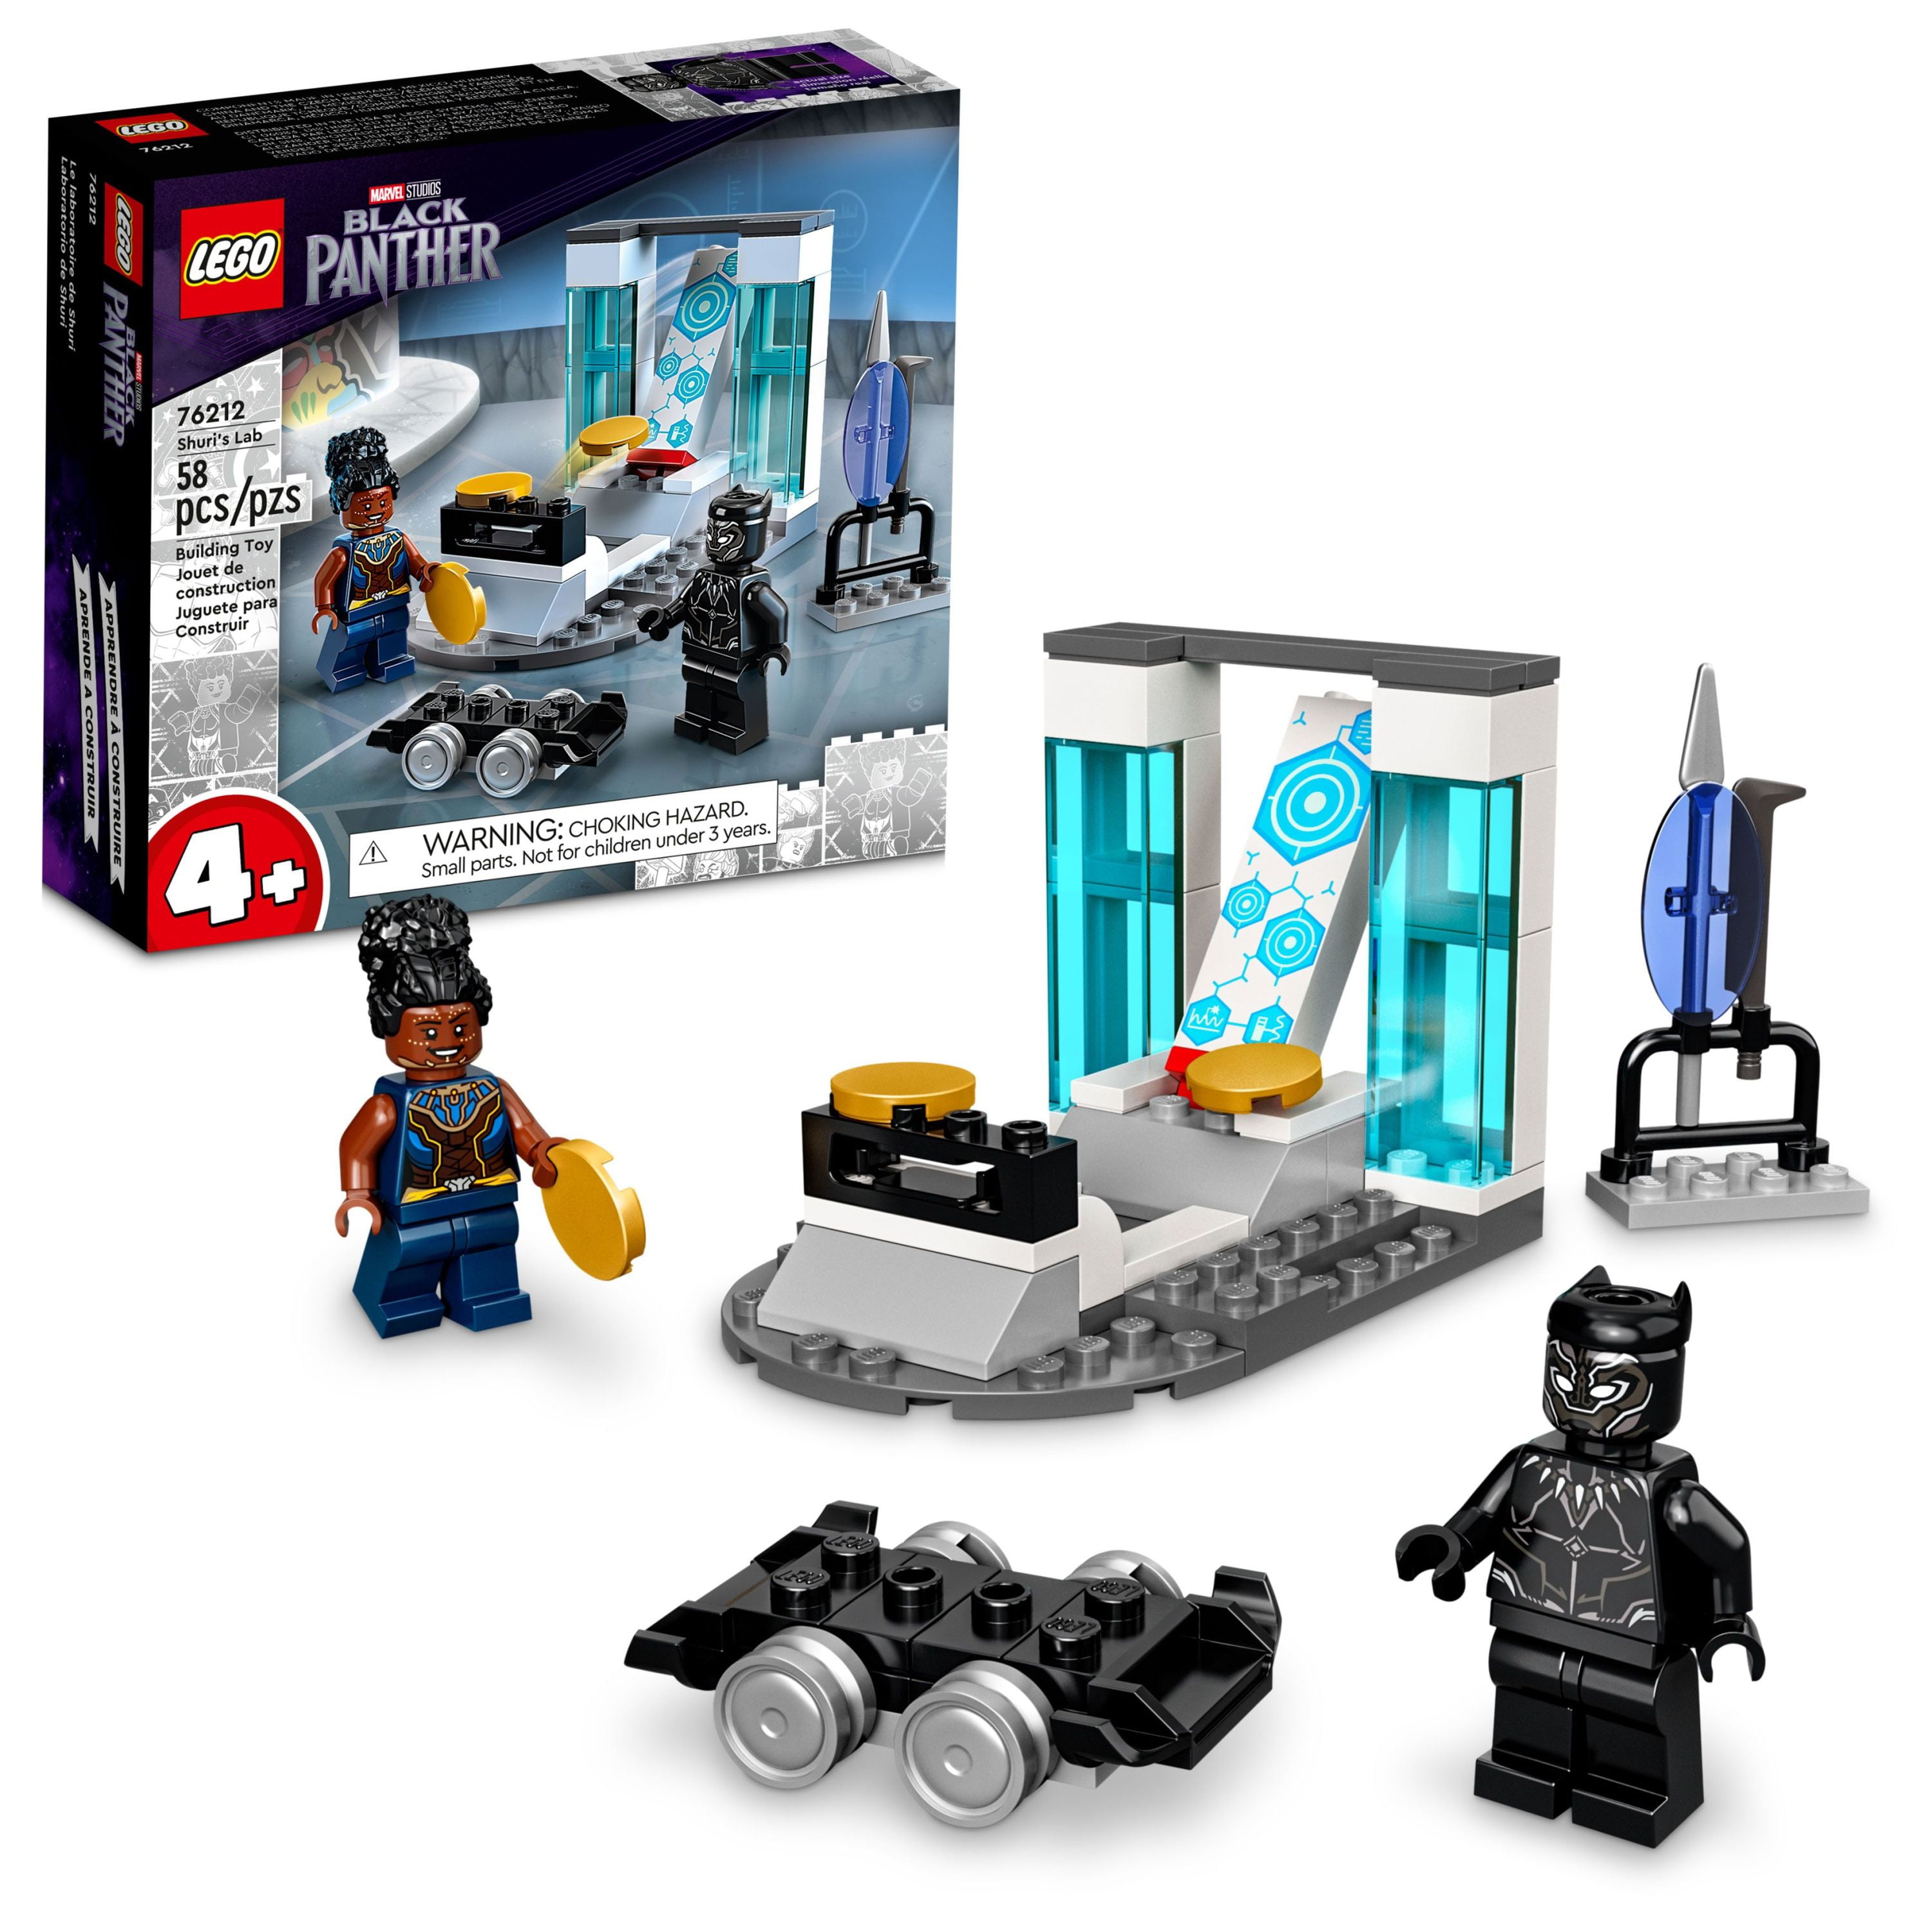 LEGO Marvel Shuri's Lab, 76212 Black Panther Construction Learning Toy with  Minifigures, Toys for Kids, Girls and Boys Age 4, Avengers Super Heroes  Gifts 